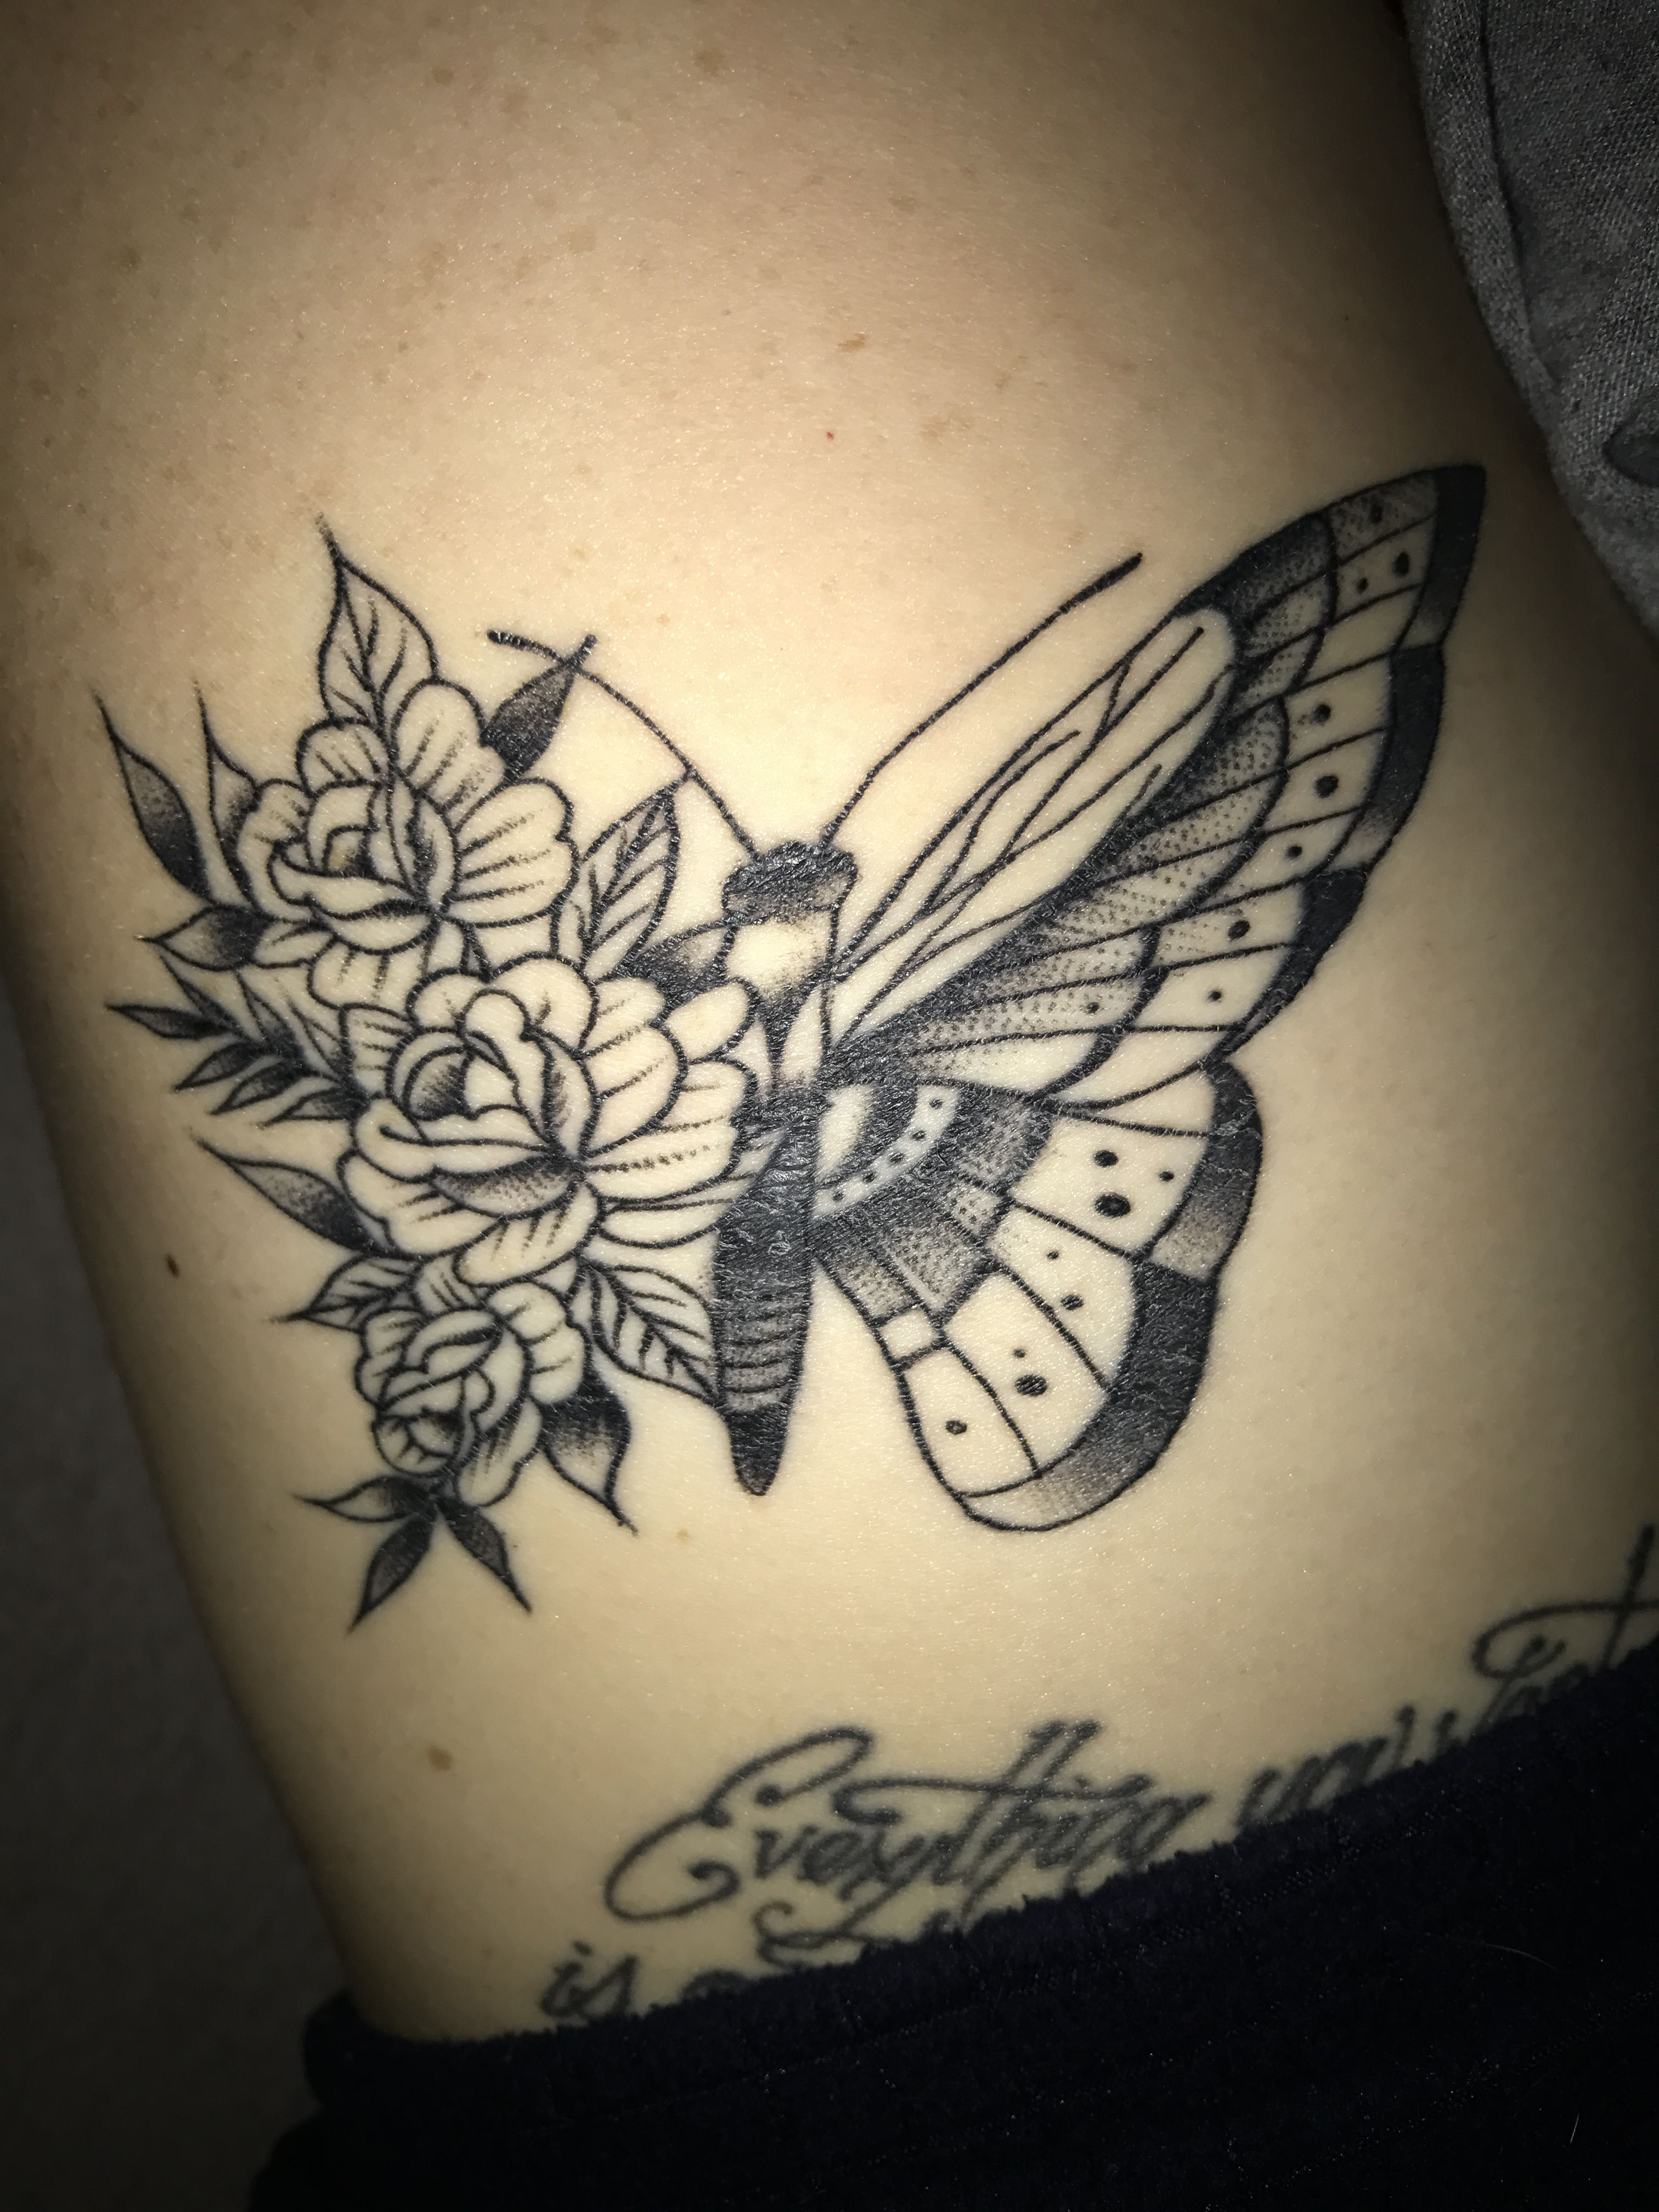 Butterfly Tattoo With Flower Wing Tattoos Tattoos Flowers Drawings intended for sizing 3024 X 4032